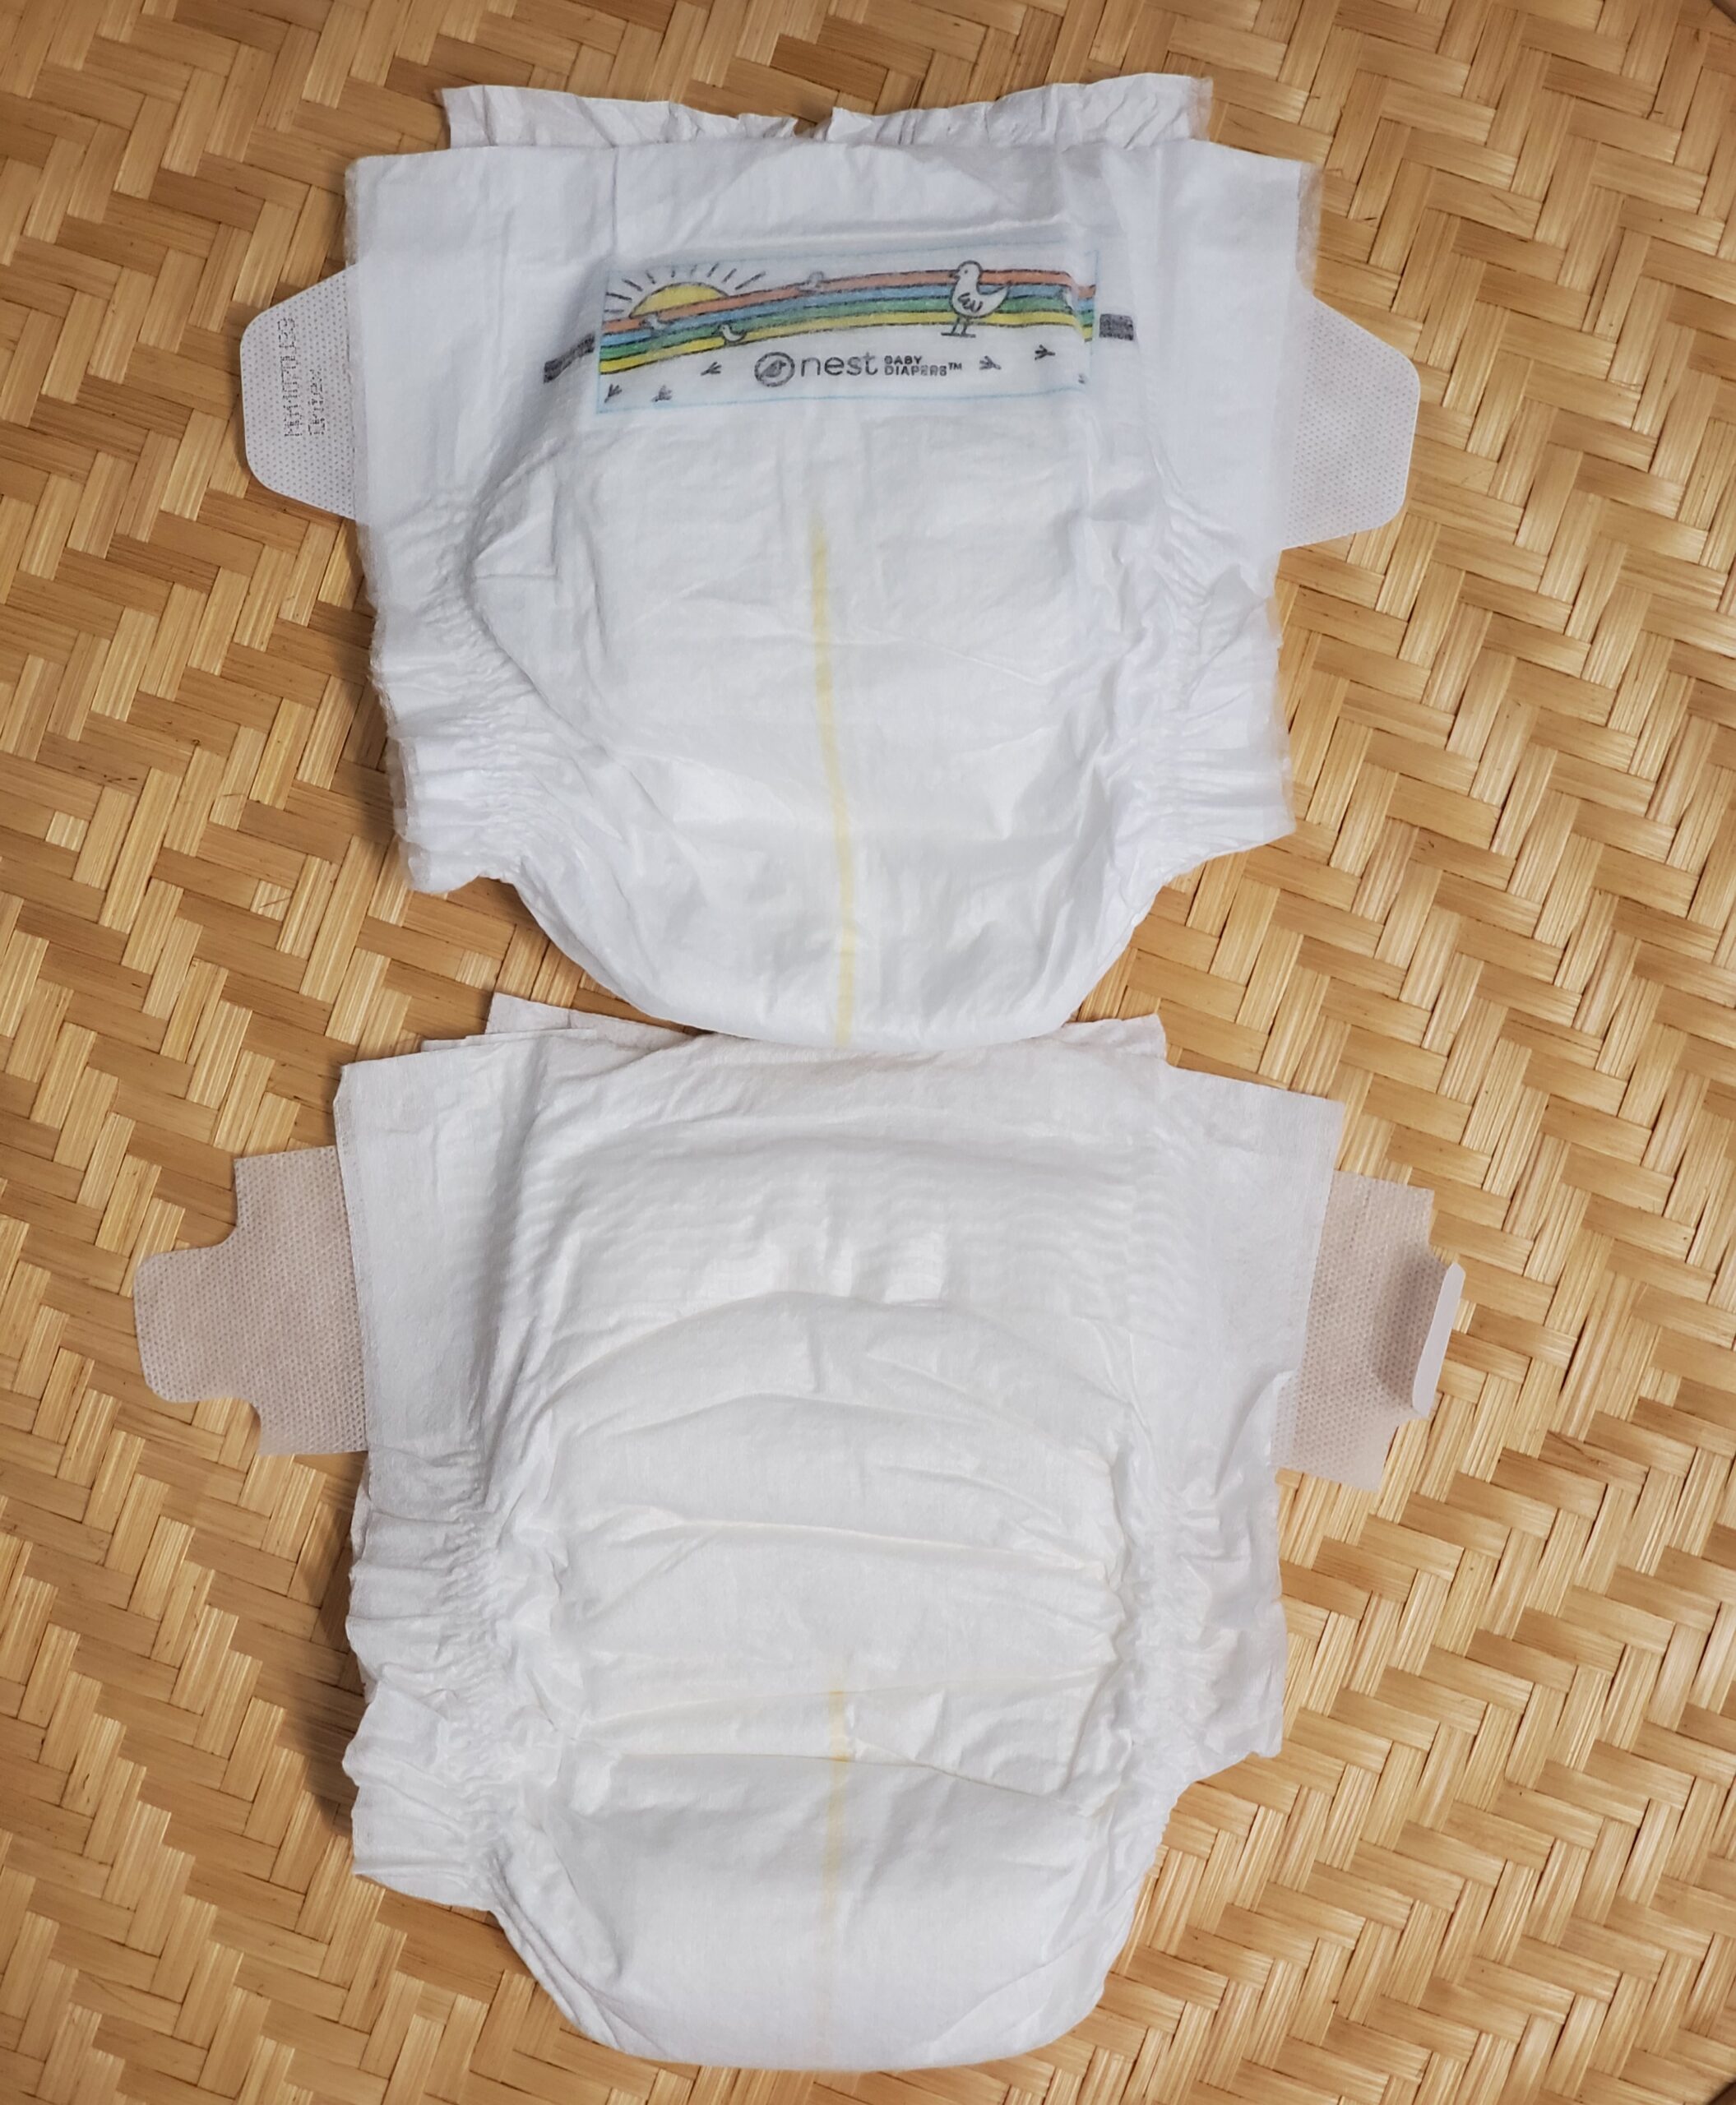 Comparing Old Nest Diapers to New